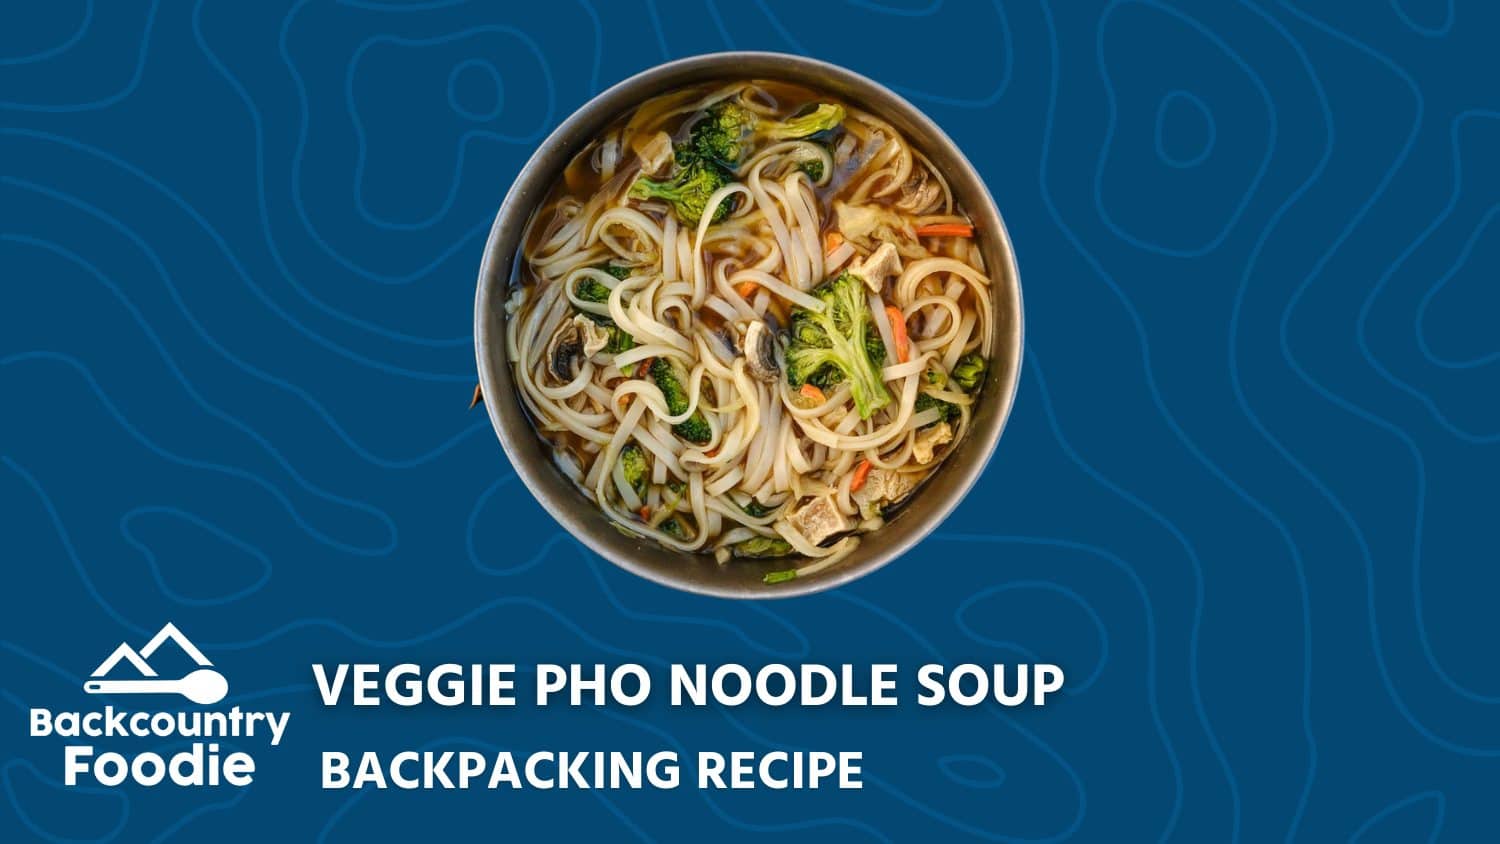 Backcountry Foodie Veggie Pho Noodle Soup Backpacking Recipe